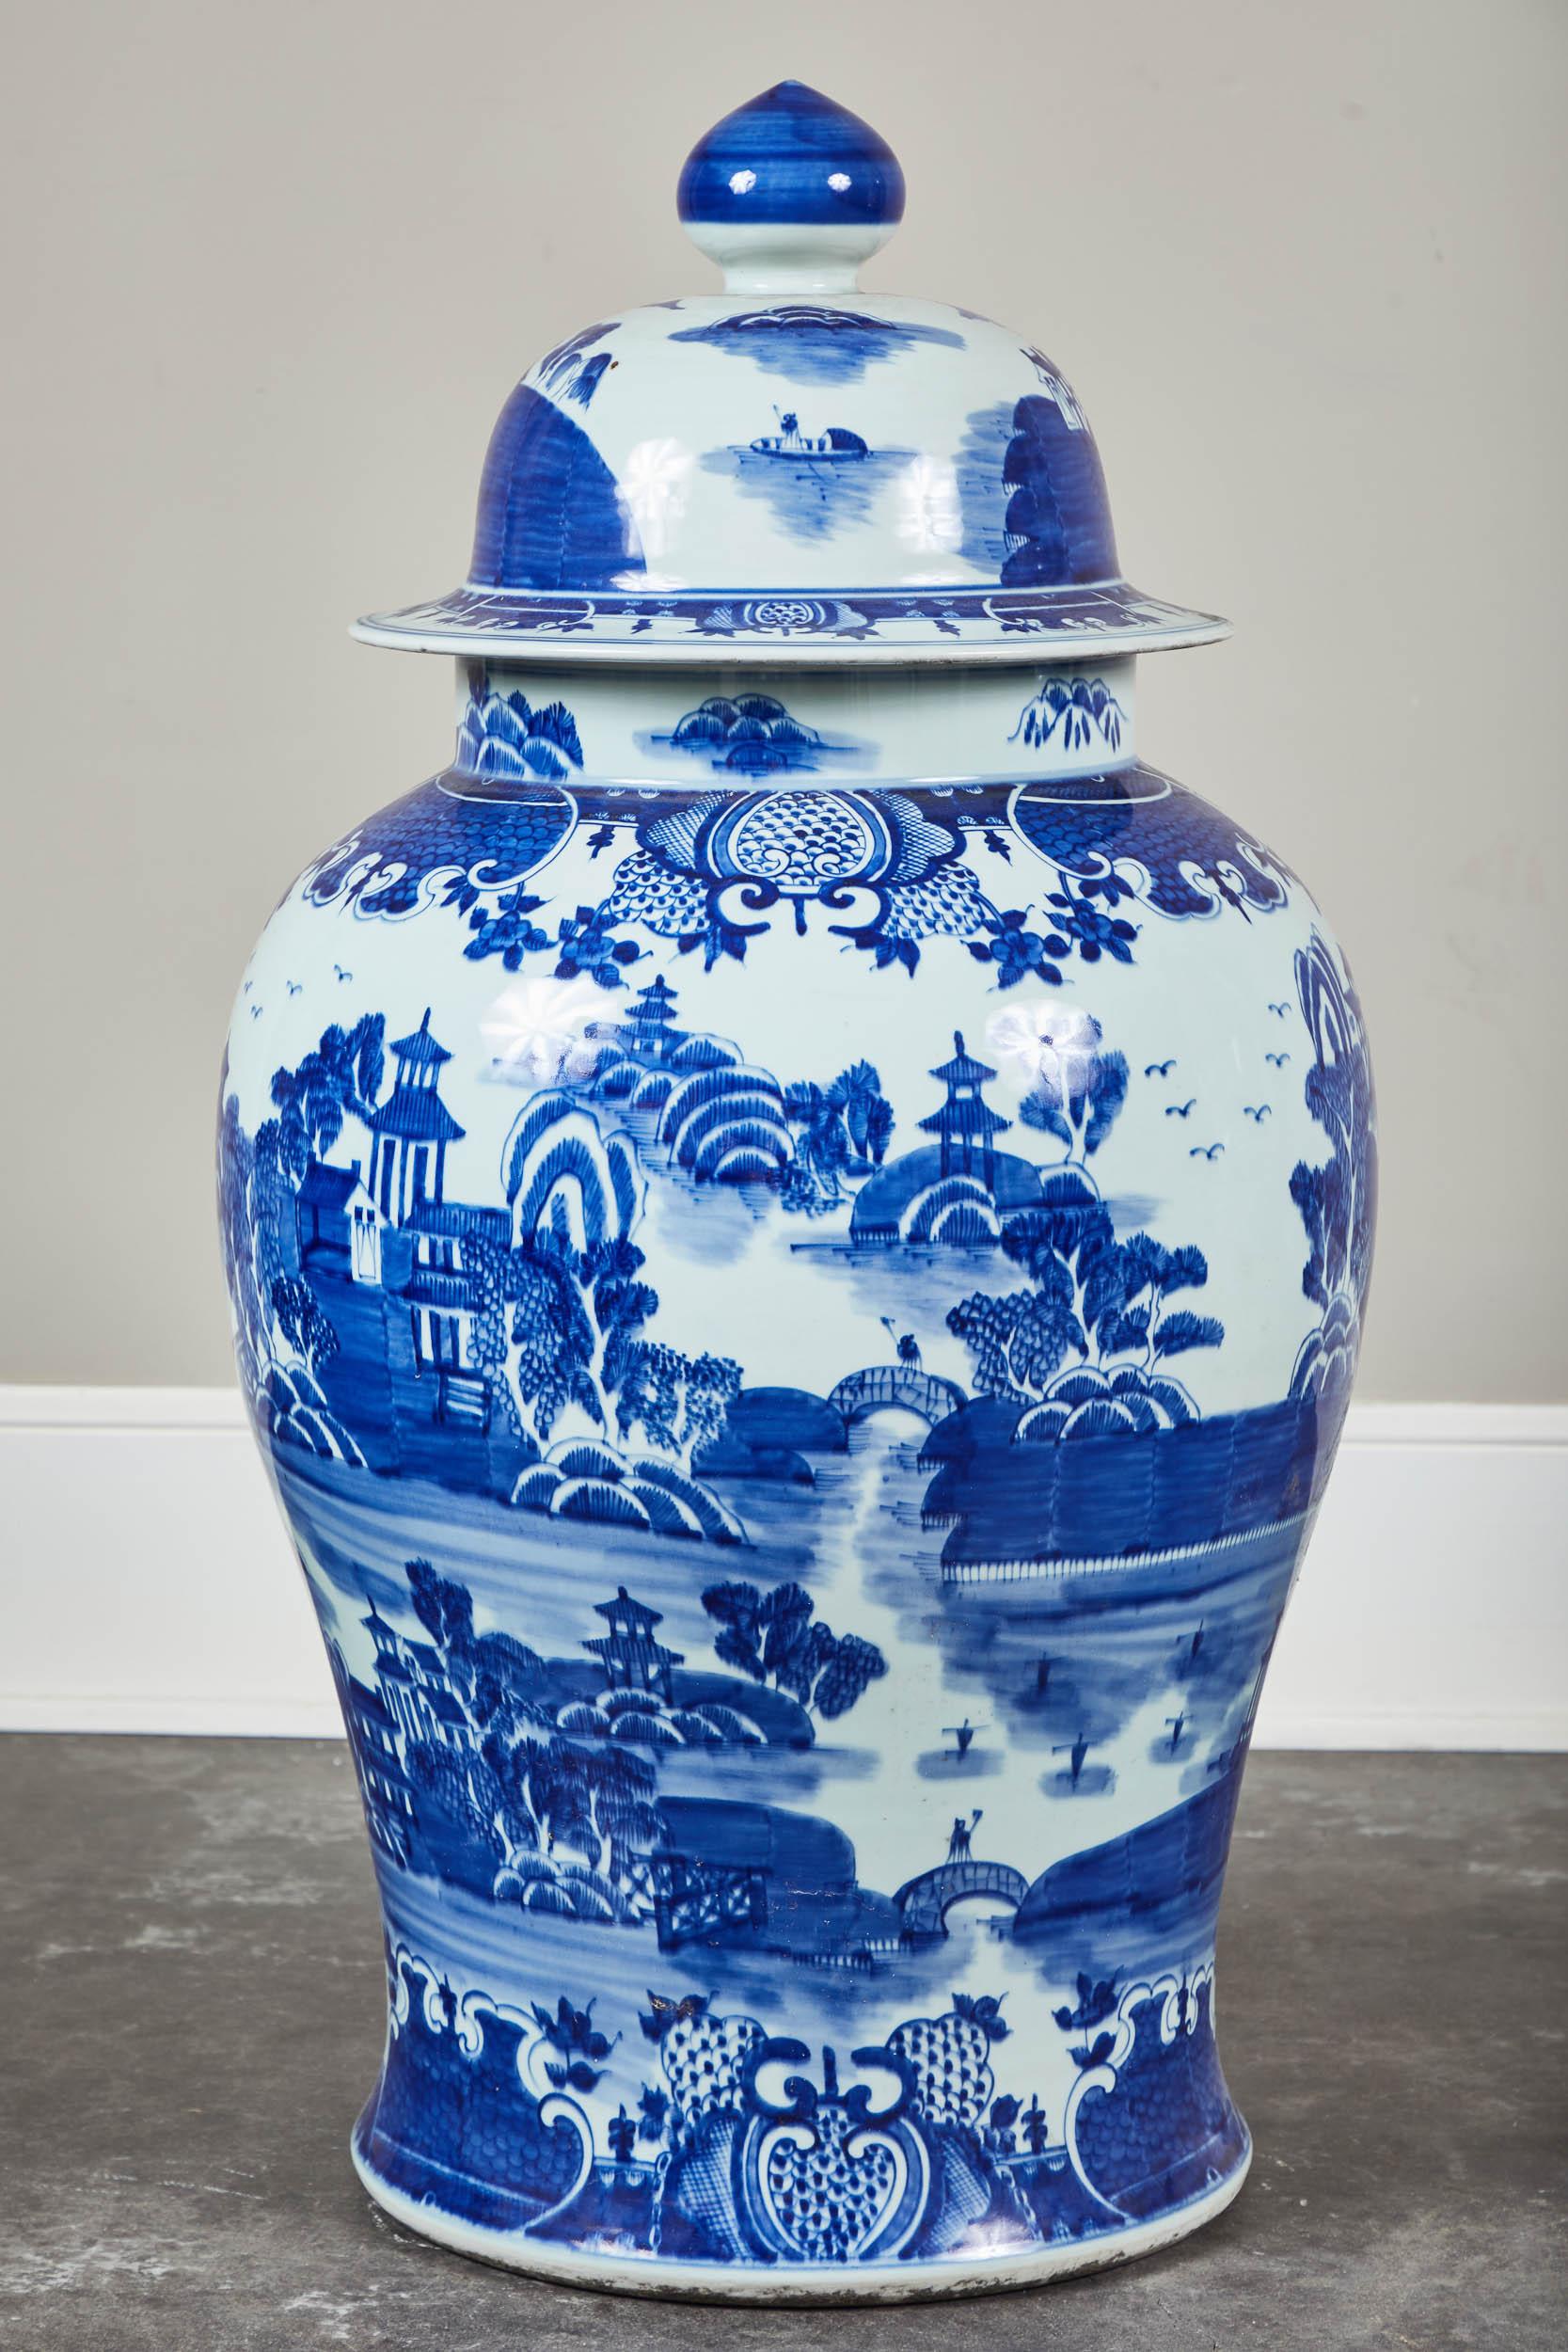 A pair of mid-20th century oversized blue and white Chinese jars with lids. Large in scale, would look stunning on pedestals or flanking a fireplace surround.